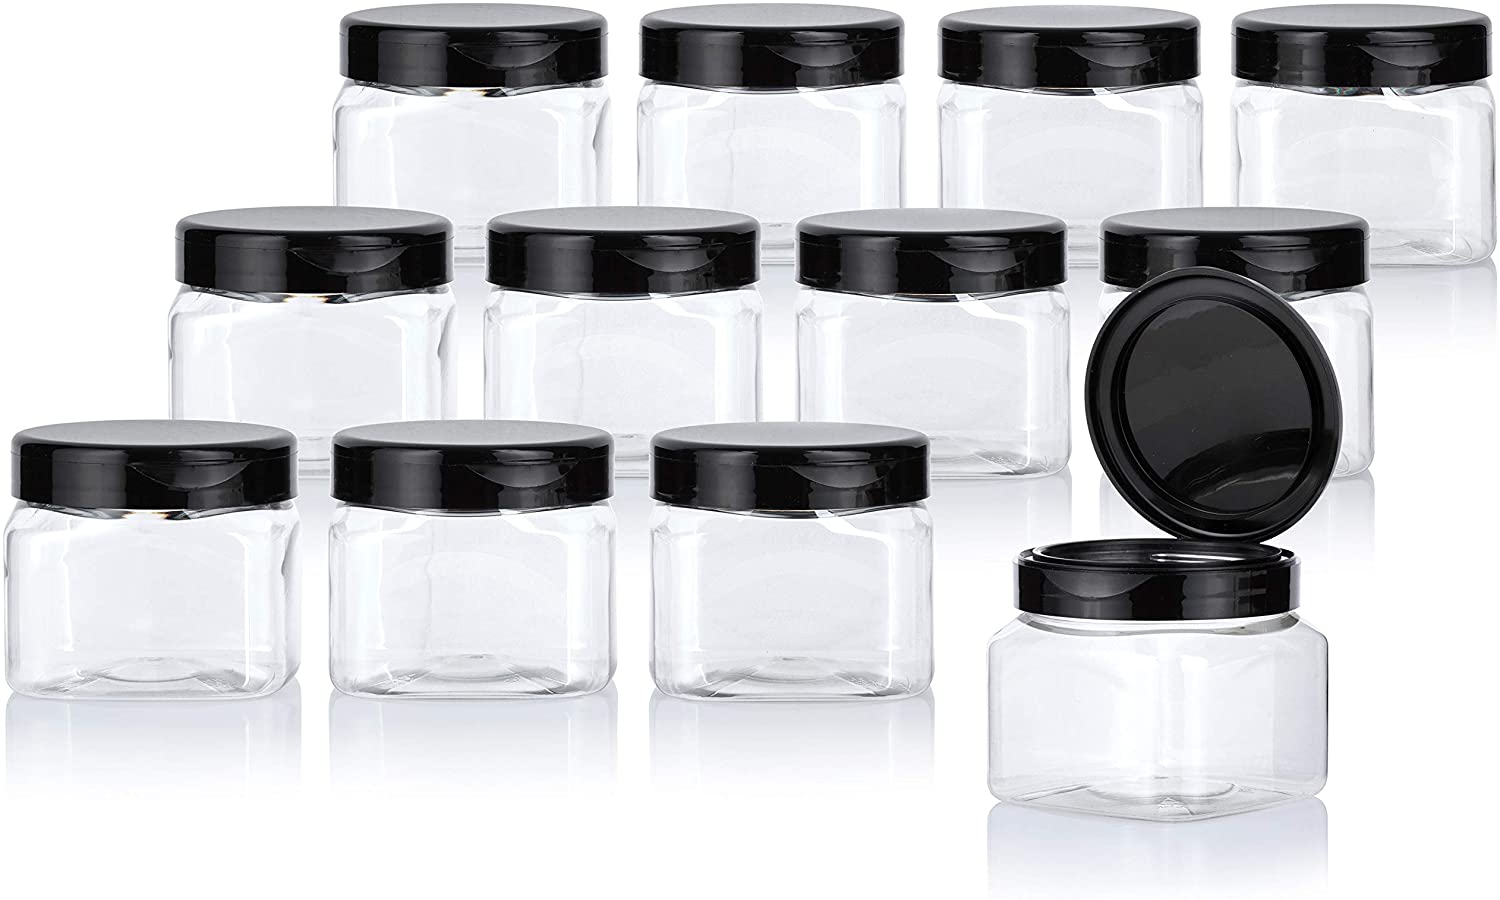 JUVITUS 8 oz Clear Glass Borosilicate Jars with Wooden Bamboo Lid (4 Pack)